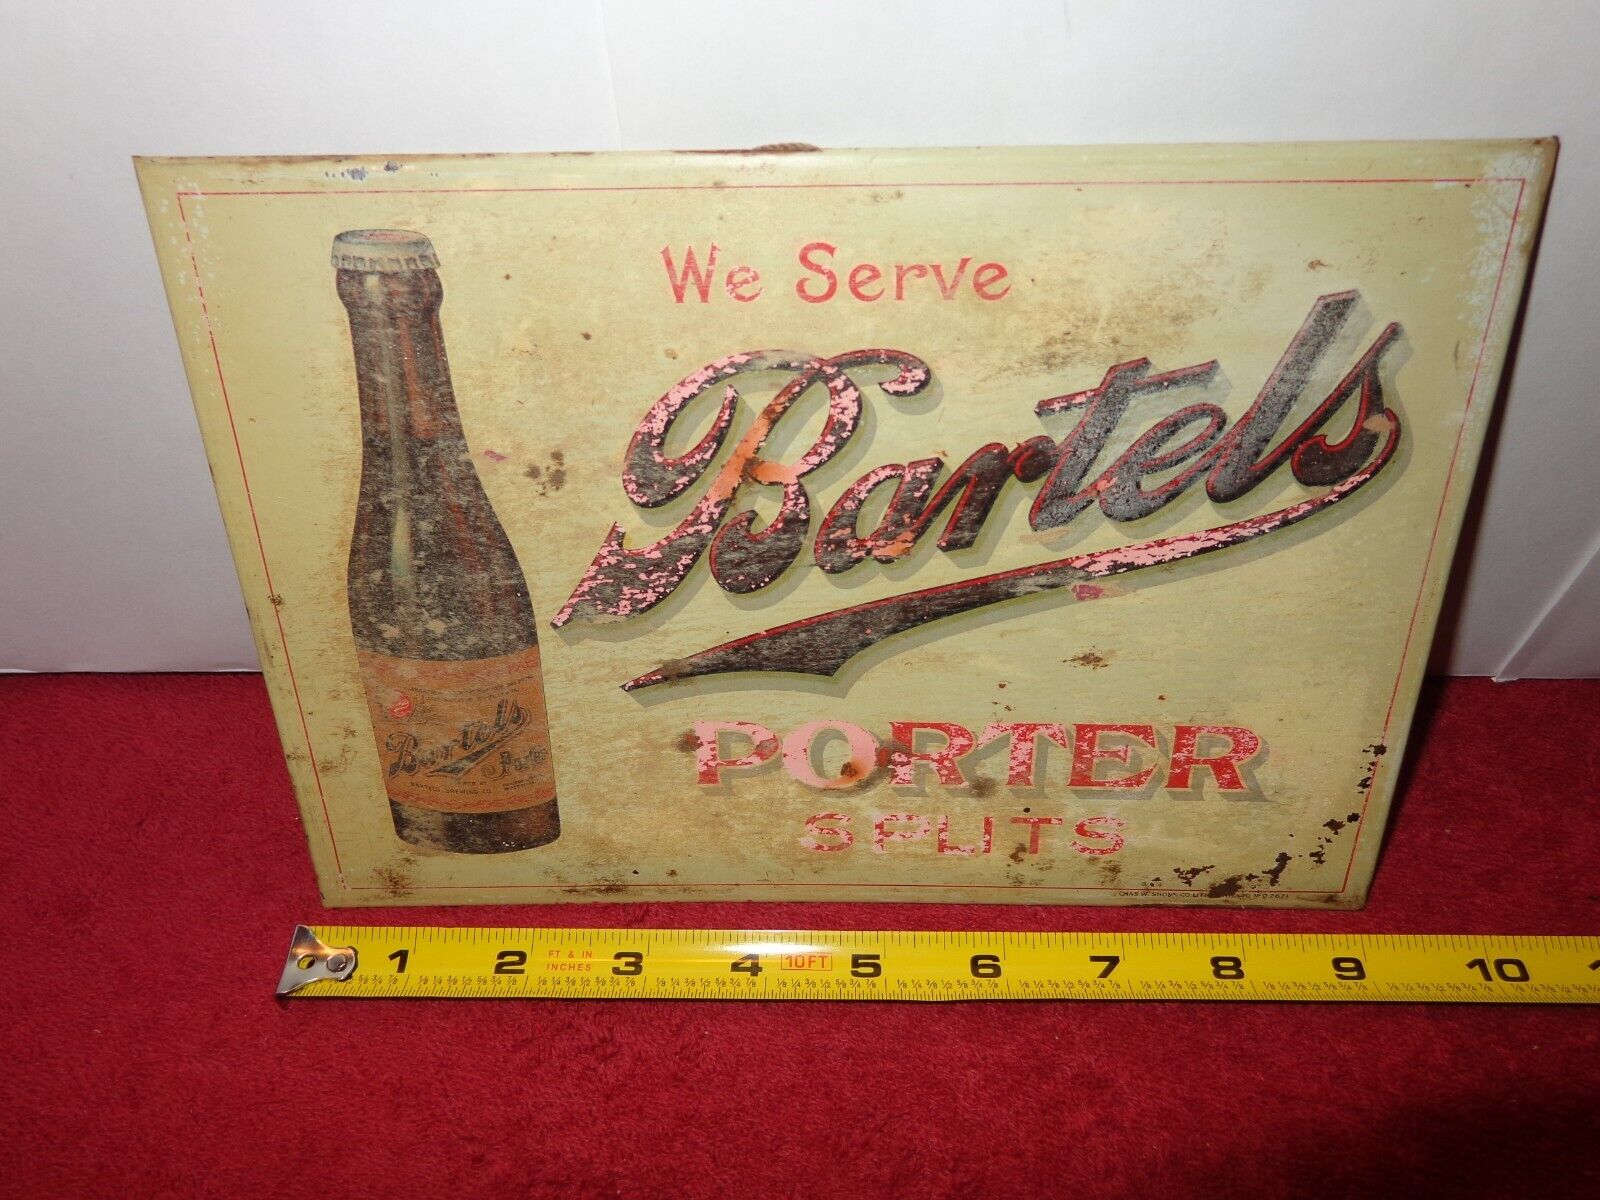 9x6 in BARTELS BREWING PORTER SPLITS BEER SIGN - BY CHAS W. SHONK  CHG IL.#Z 246